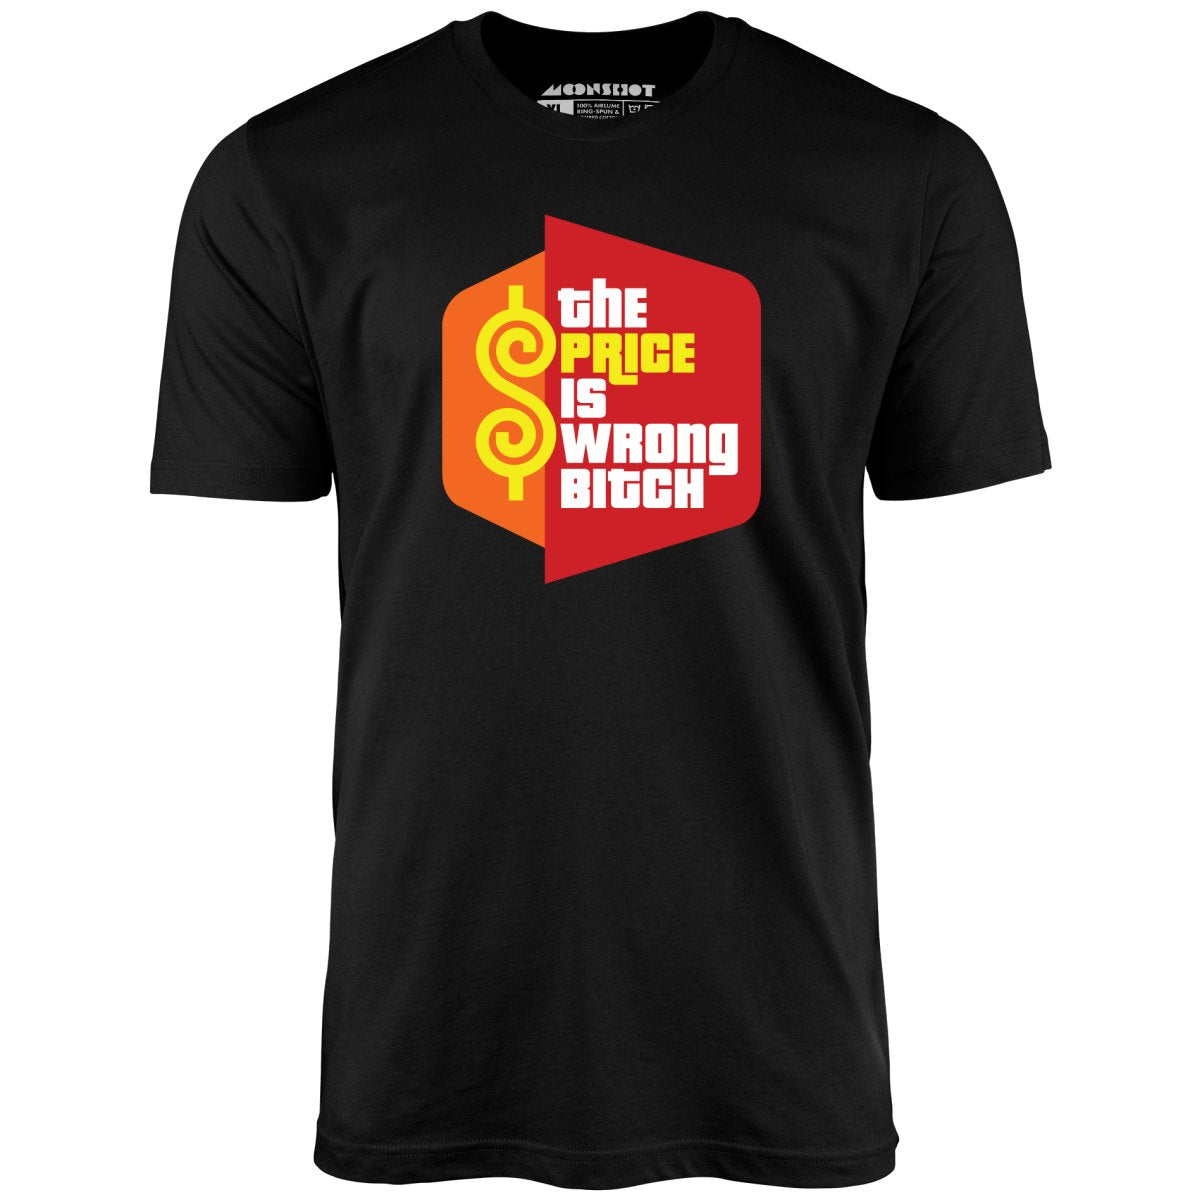 The Price is Wrong Bitch - Unisex T-Shirt